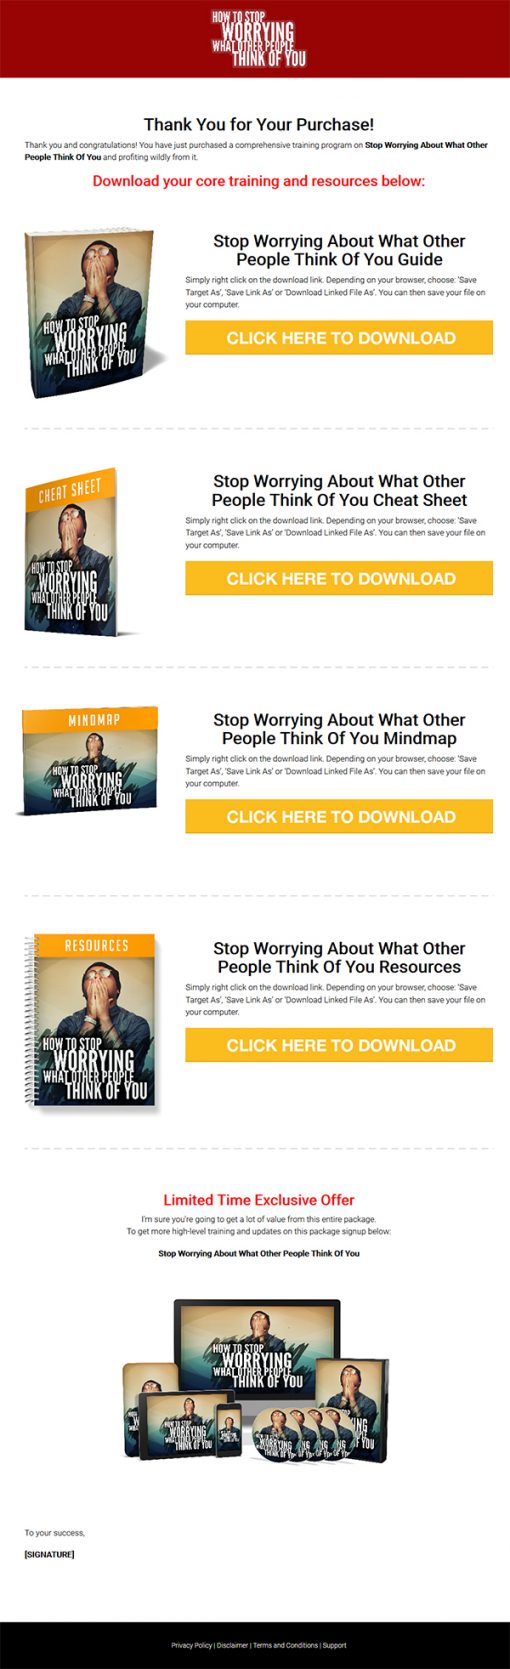 How to Stop Worrying What Other People Think Ebook and Videos MRR